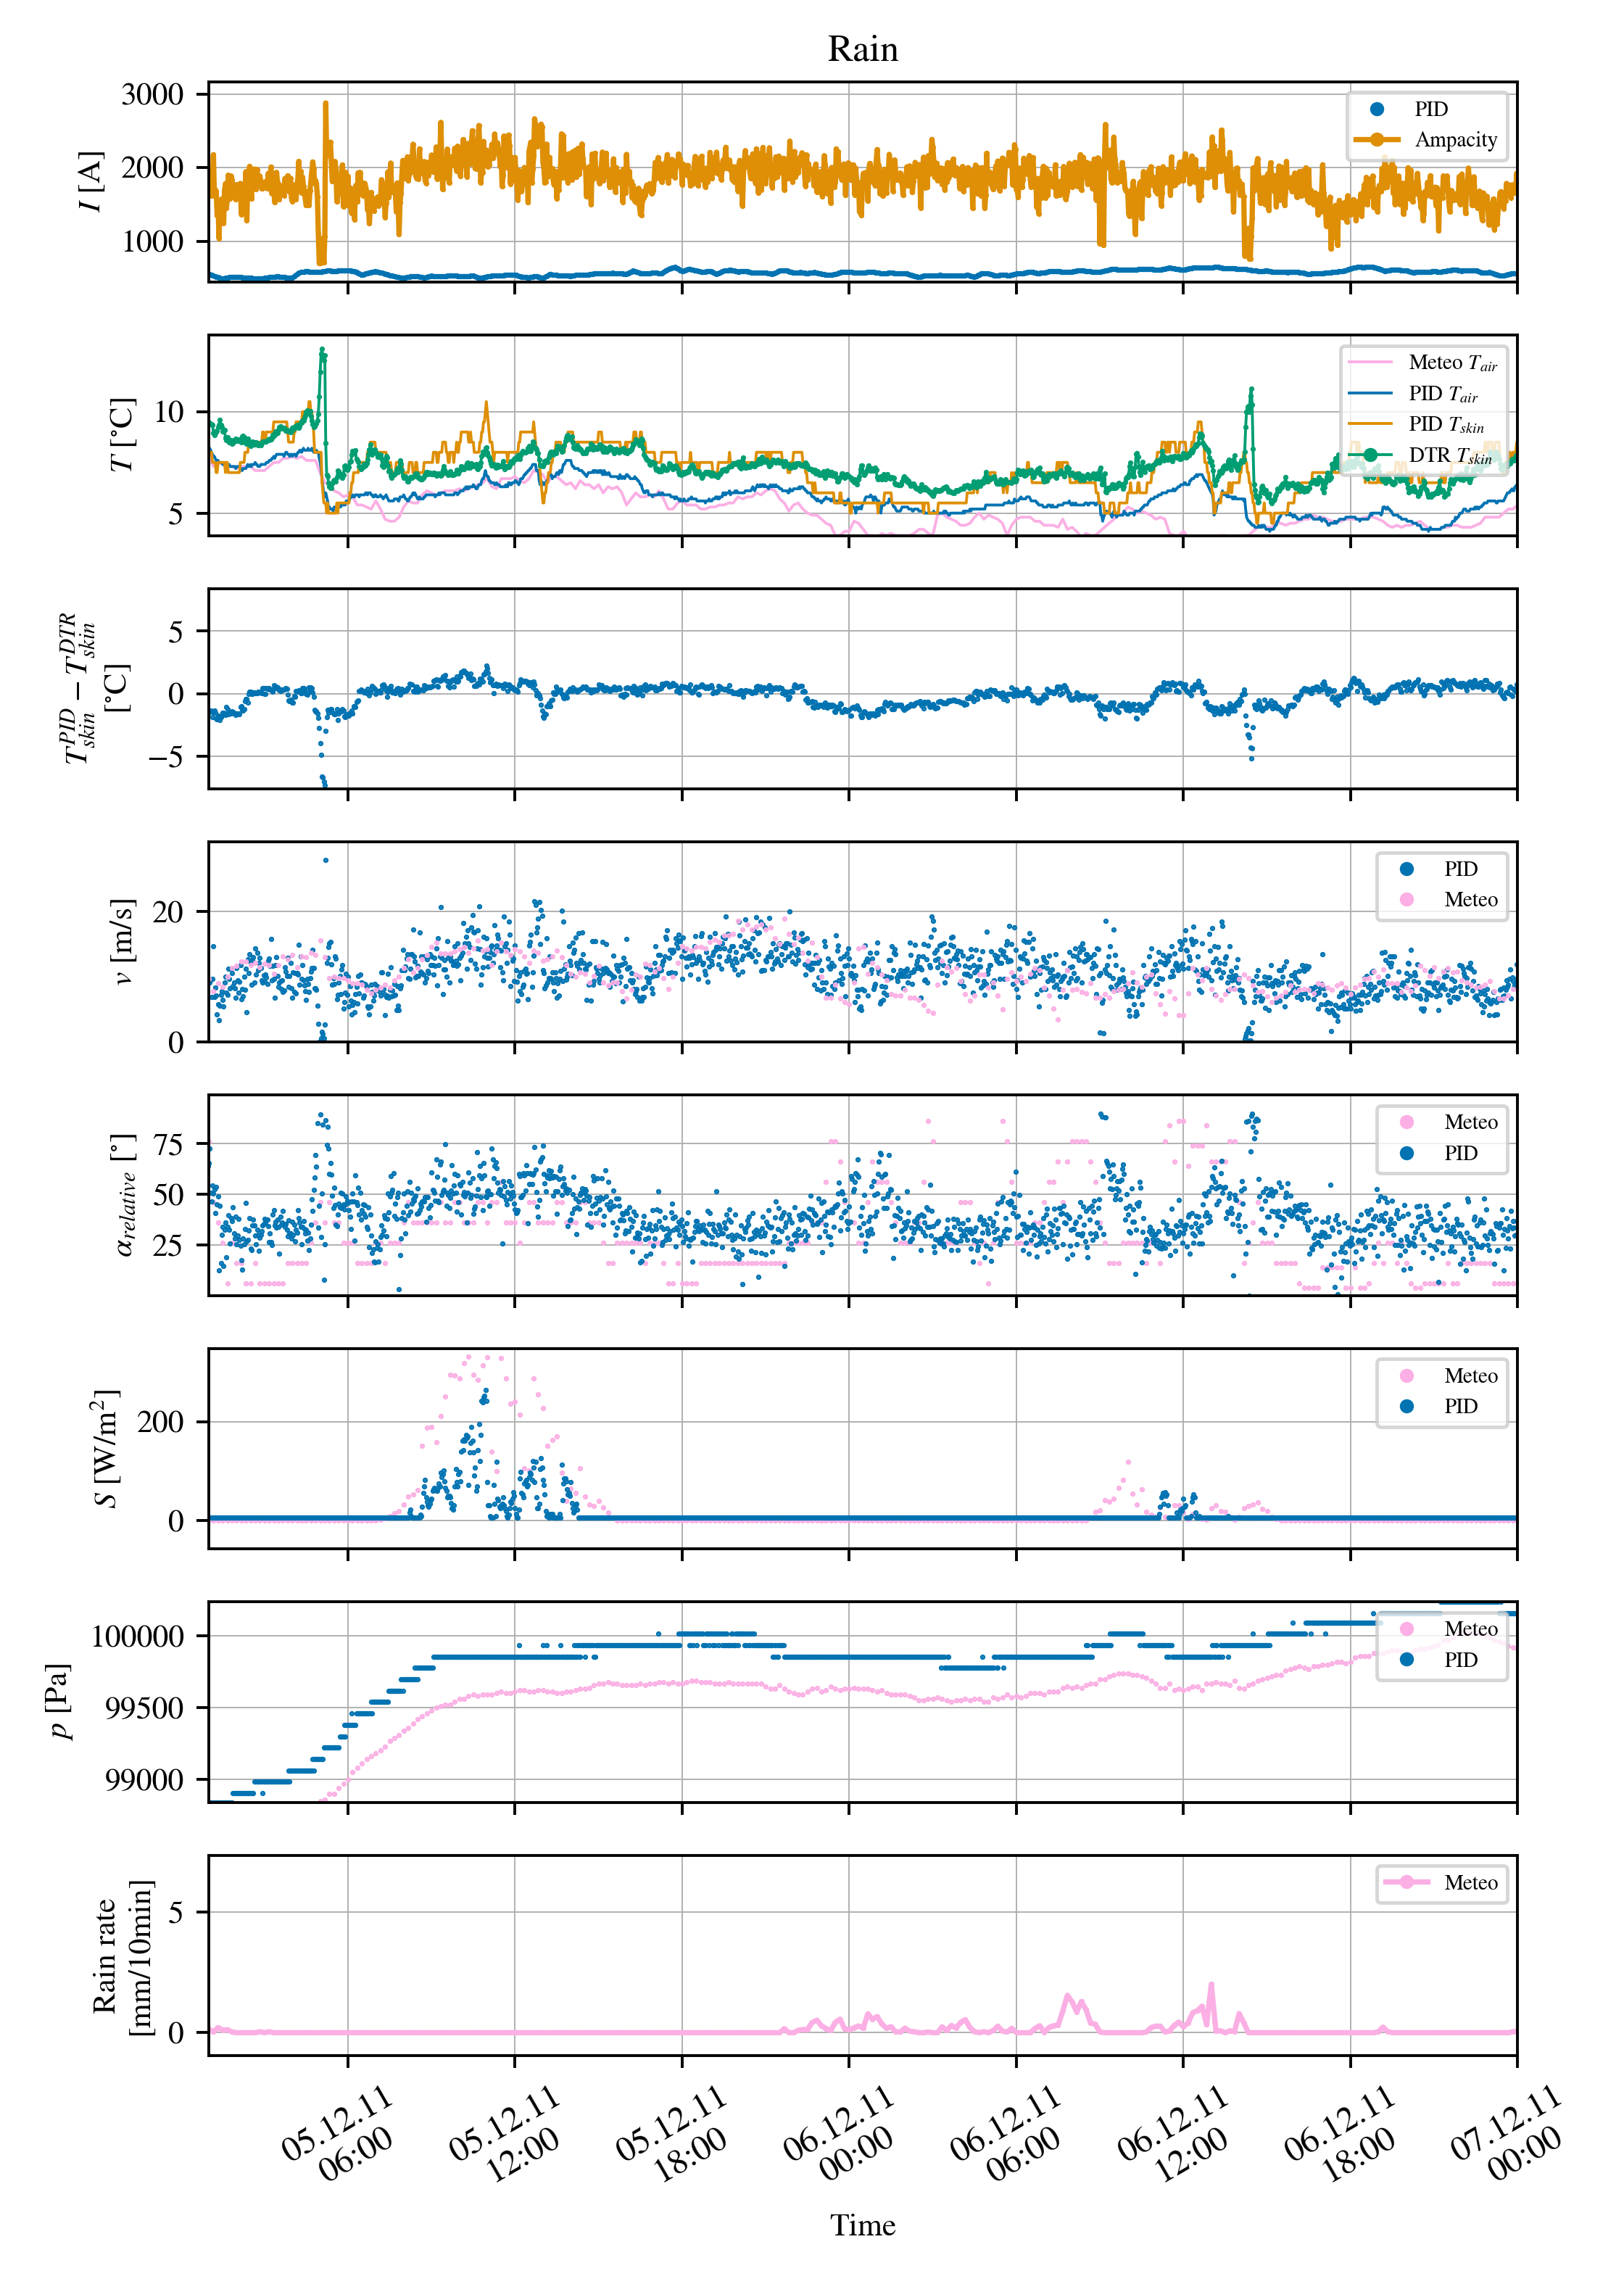 An example of DTR performance in rainy conditions. The first section shows the operating current and the calculated ampacity. Next are the measured skin temperature of the Al/St line, and air temperature (both from the sensor on the mast (PID), and from the meteorological station (Meteo), and the calculated line temperature. Below are the relevant weather measurements.